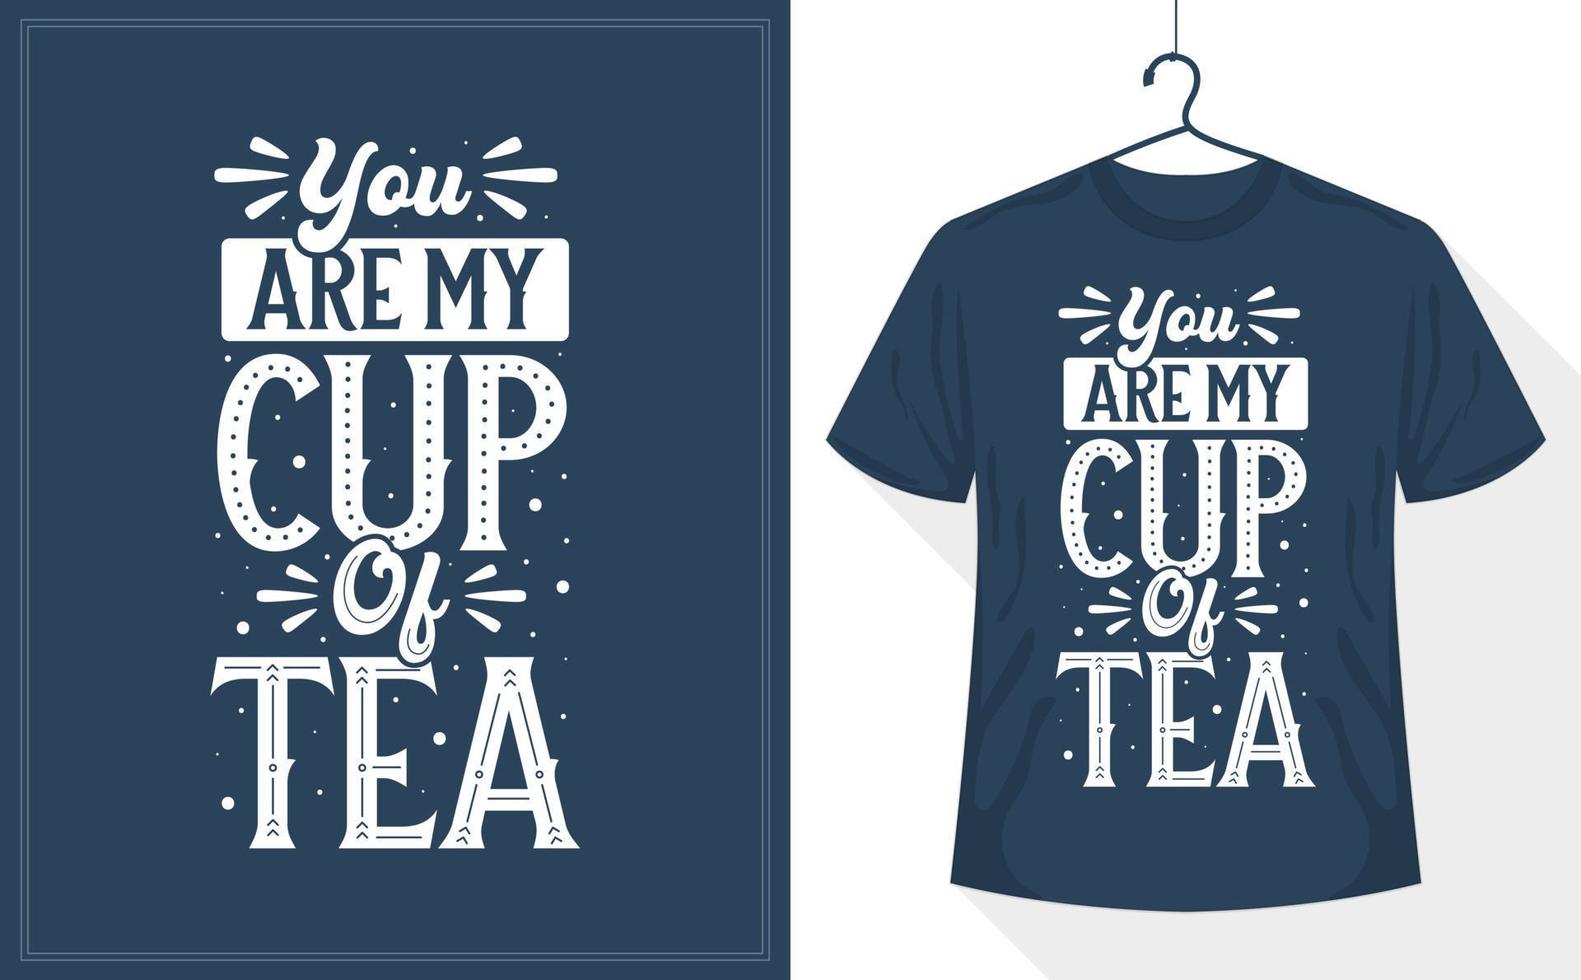 You're My Cup of Tea, Tea quotes typography design vector